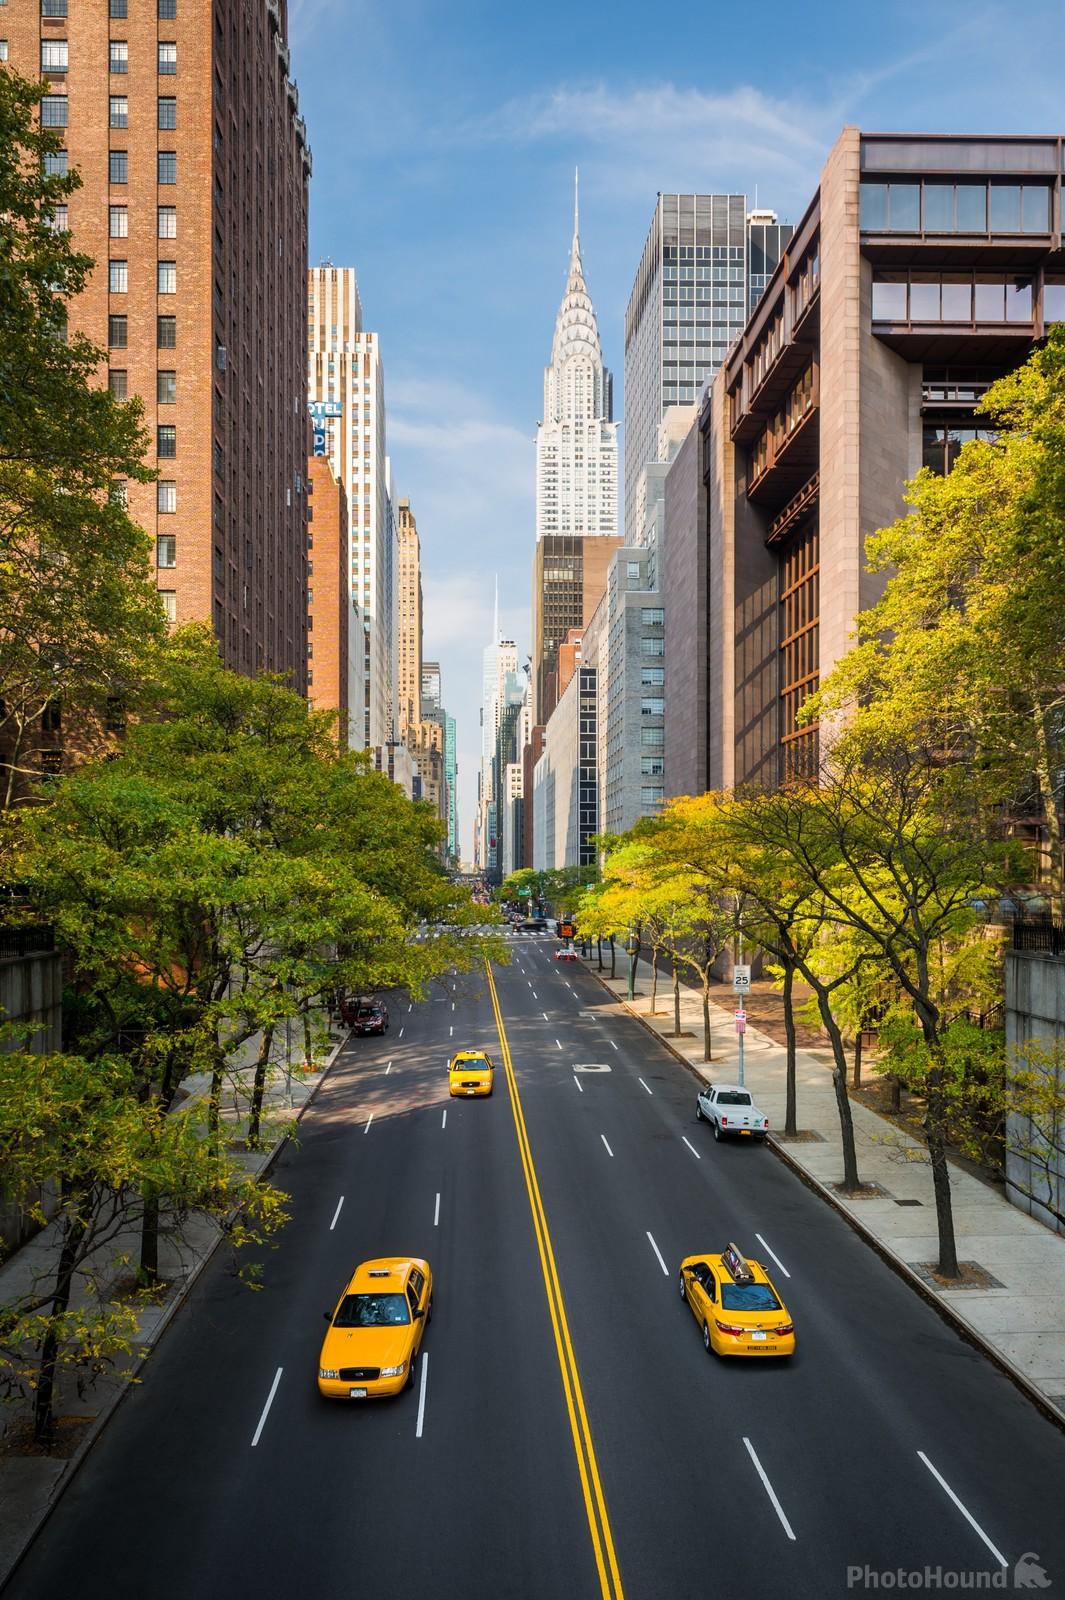 Image of Tudor City Overpass by VOJTa Herout